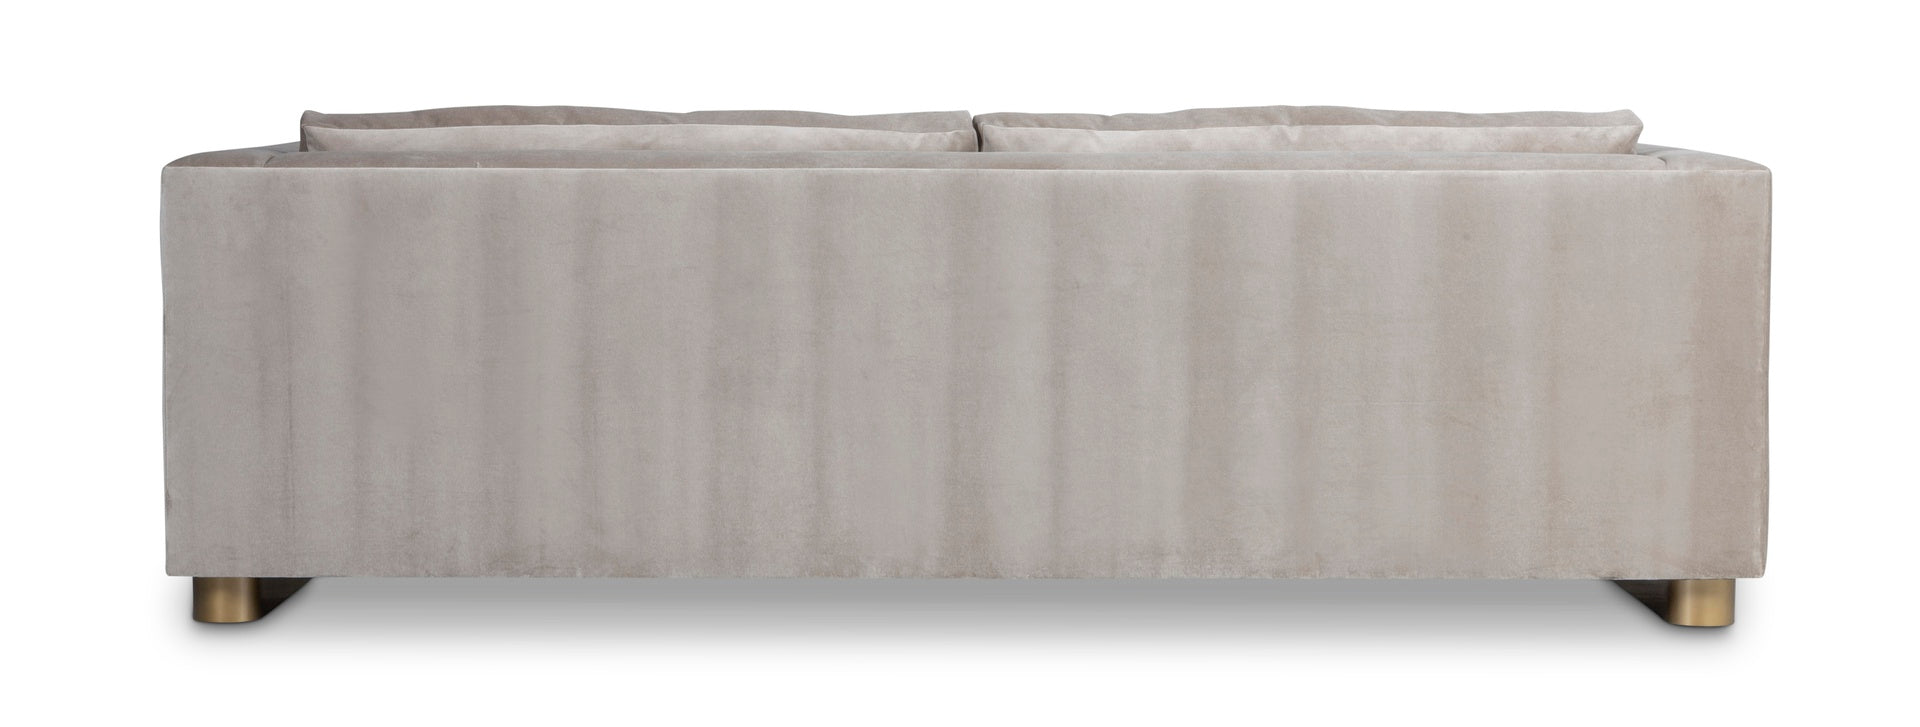 Cannes Sofa - Call For Pricing 1-800-464-1317